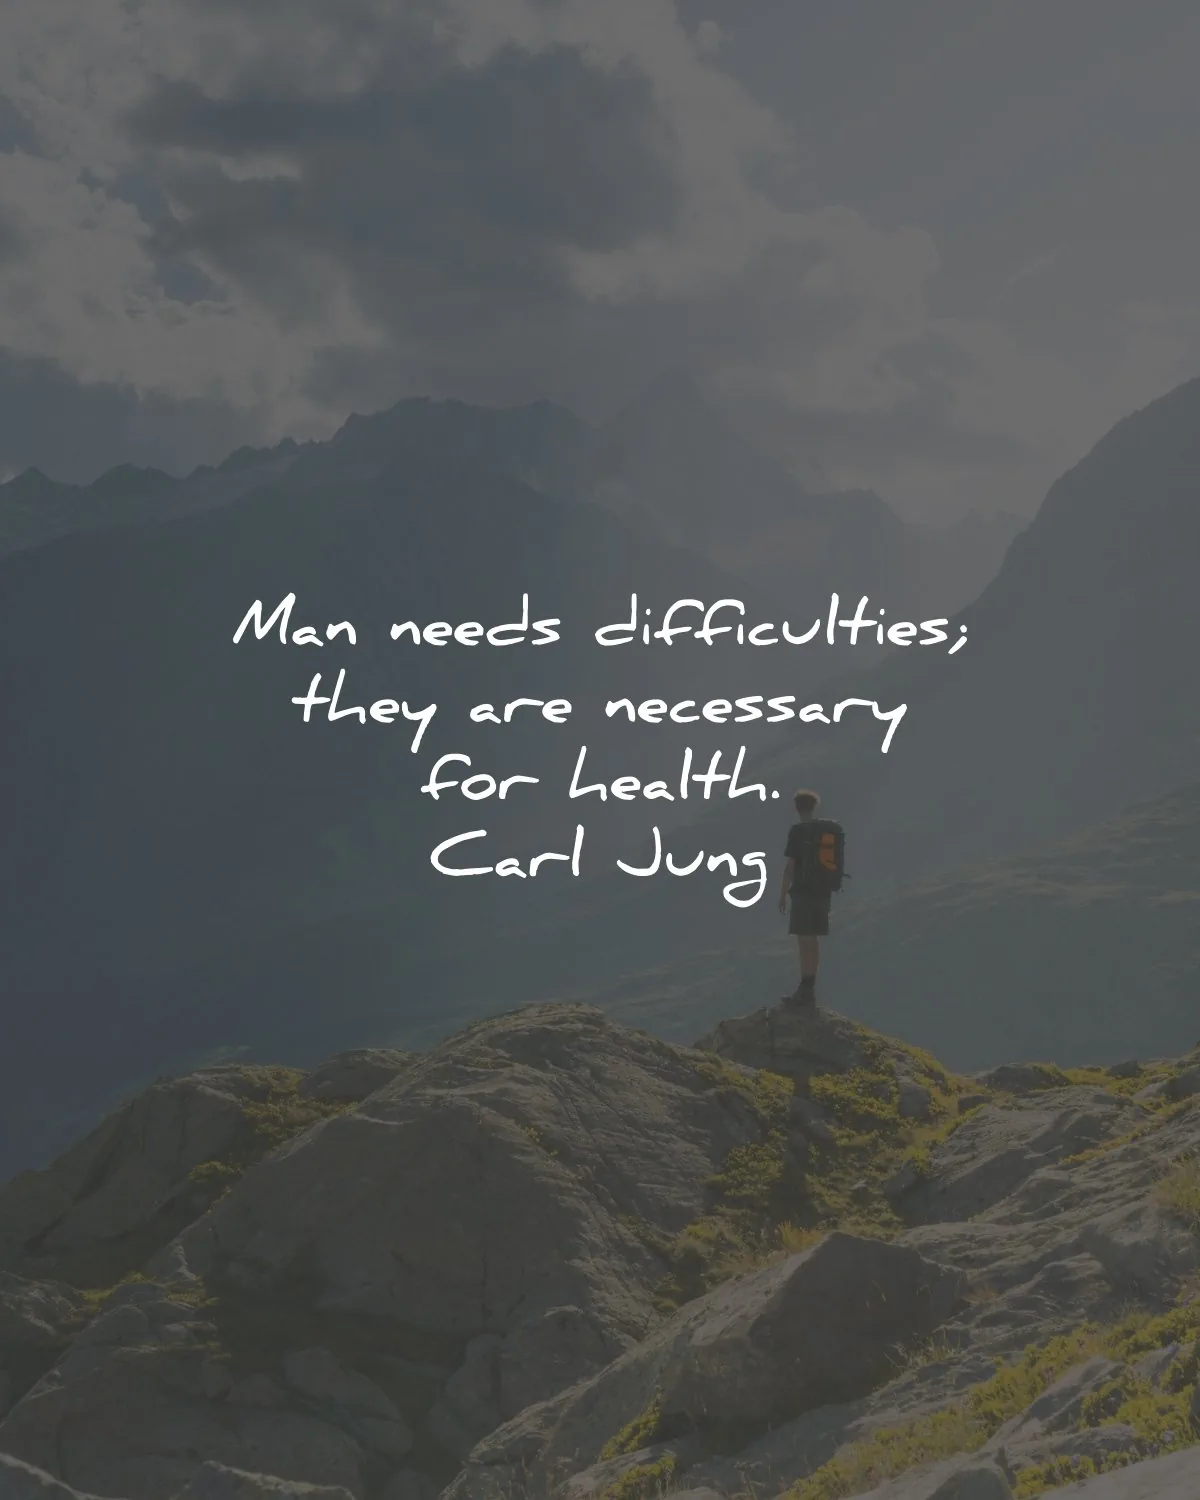 health quotes needs difficulties carl jung wisdom